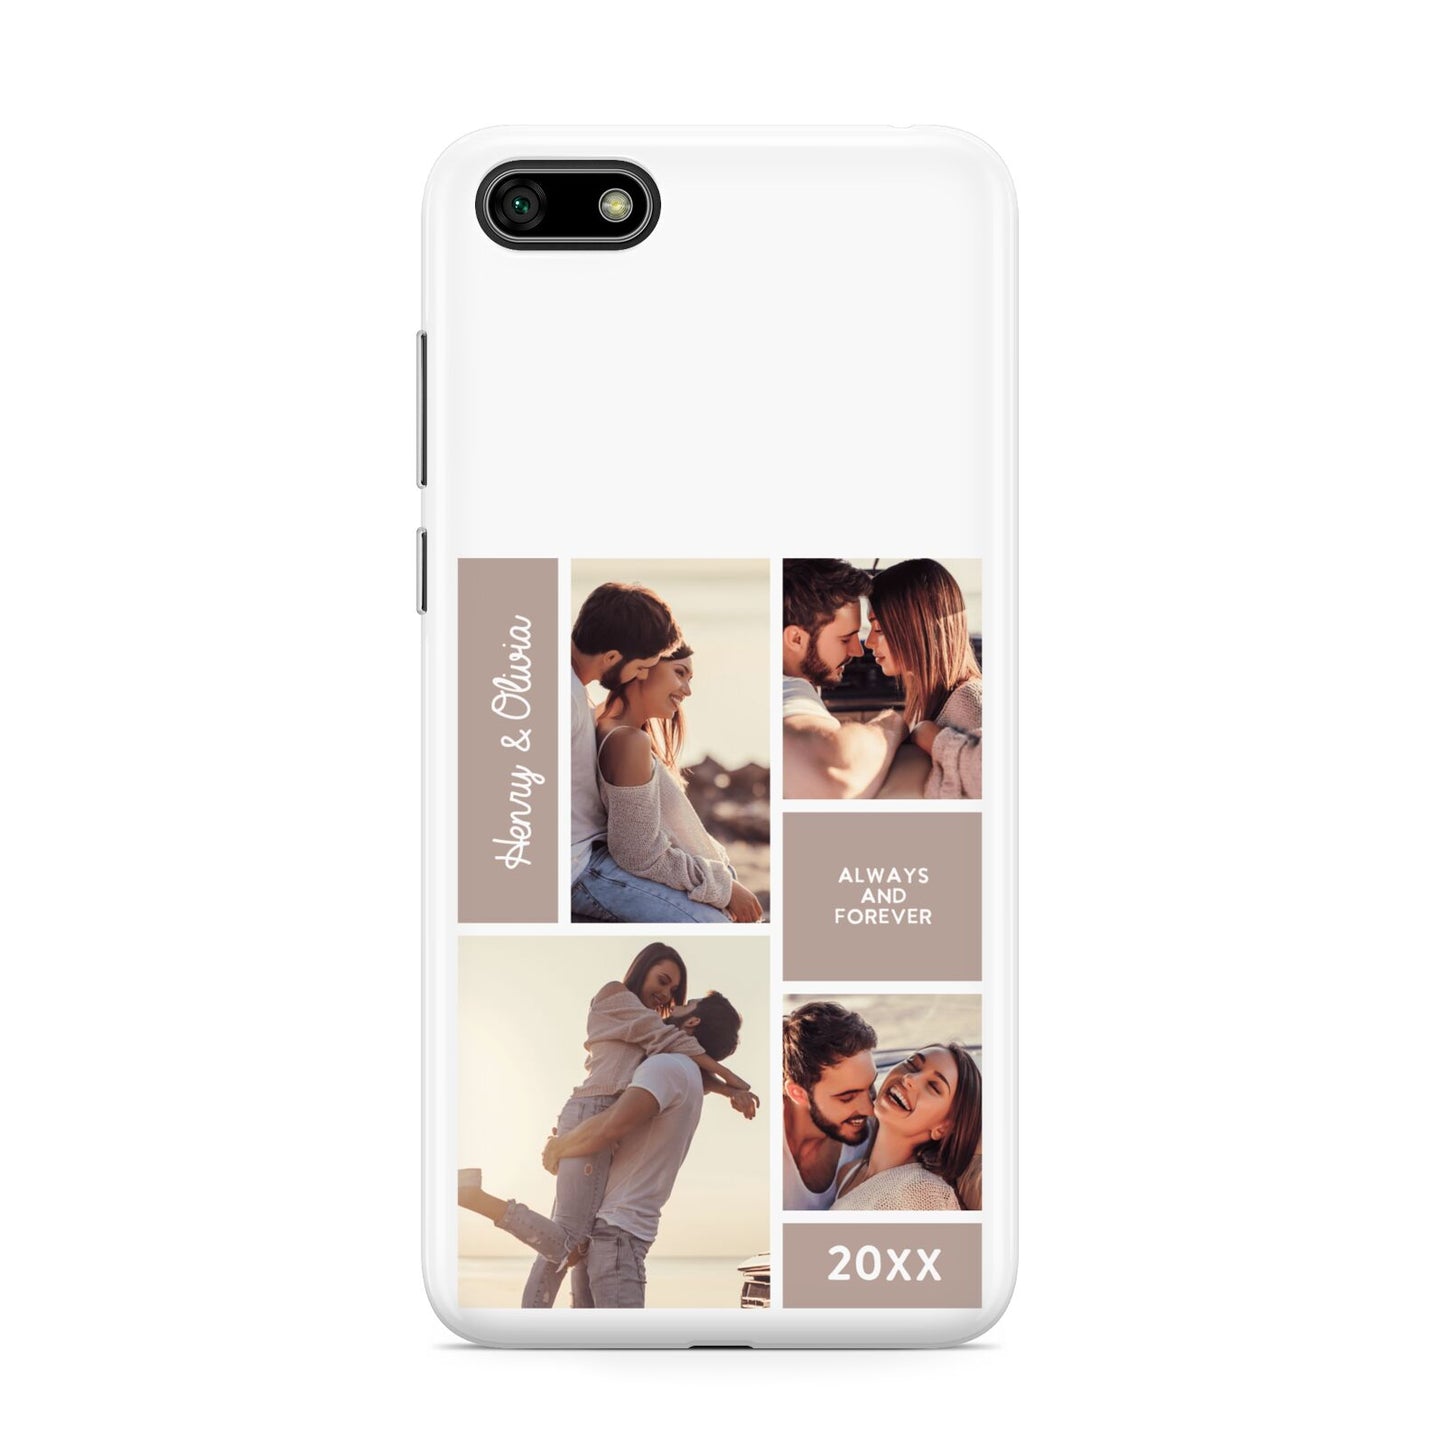 Couples Valentine Photo Collage Personalised Huawei Y5 Prime 2018 Phone Case